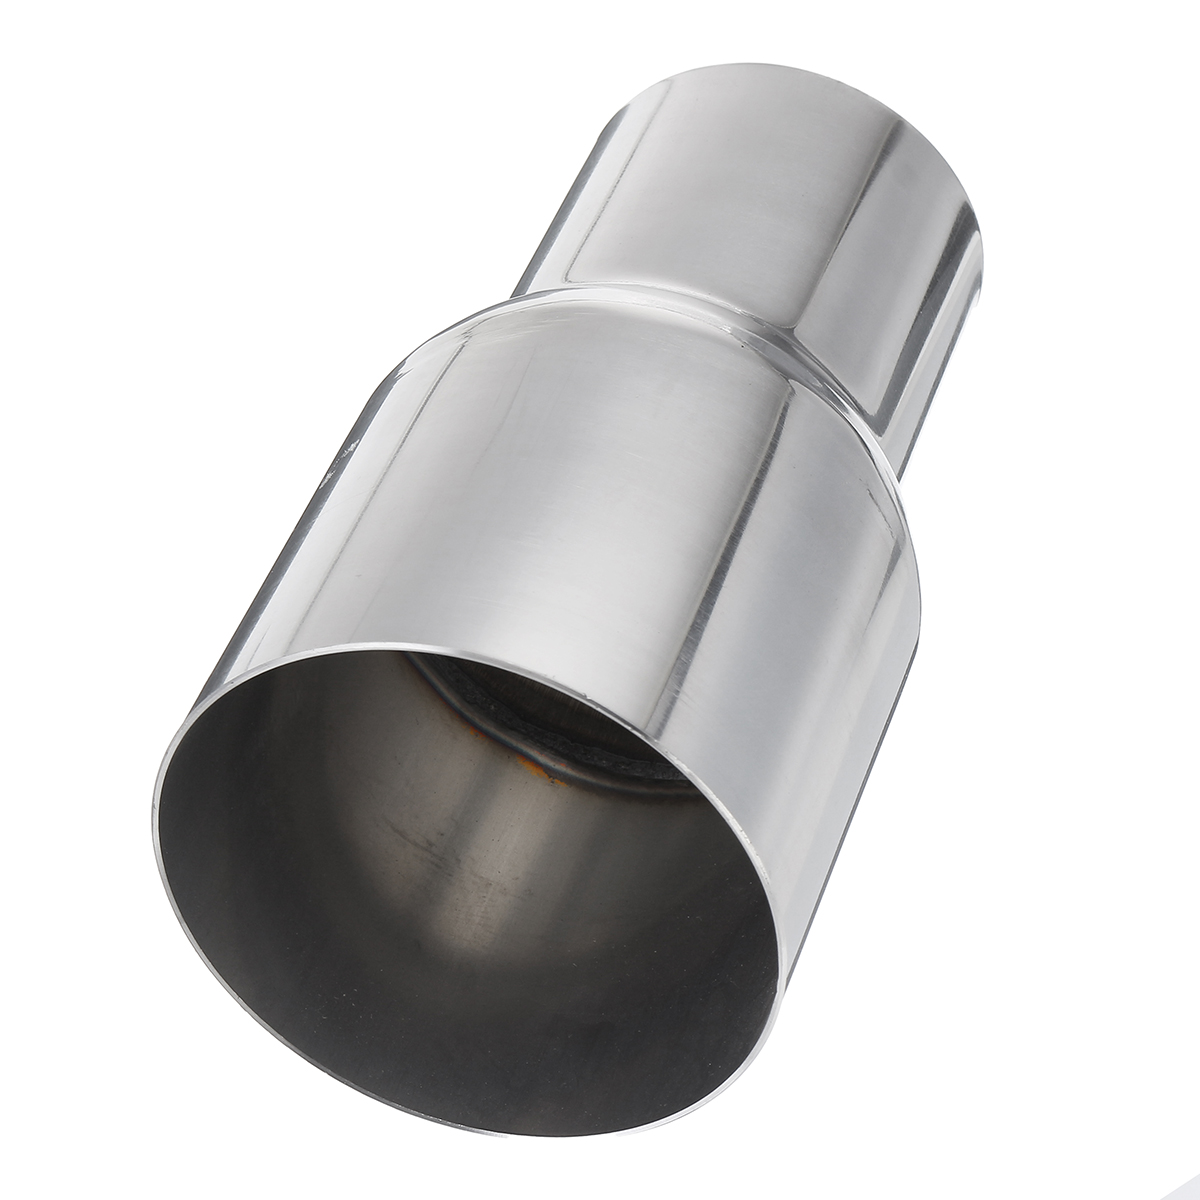 Other Exhausts & Exhaust Systems - 3 Inch To 2 Inch Exhaust Reducer